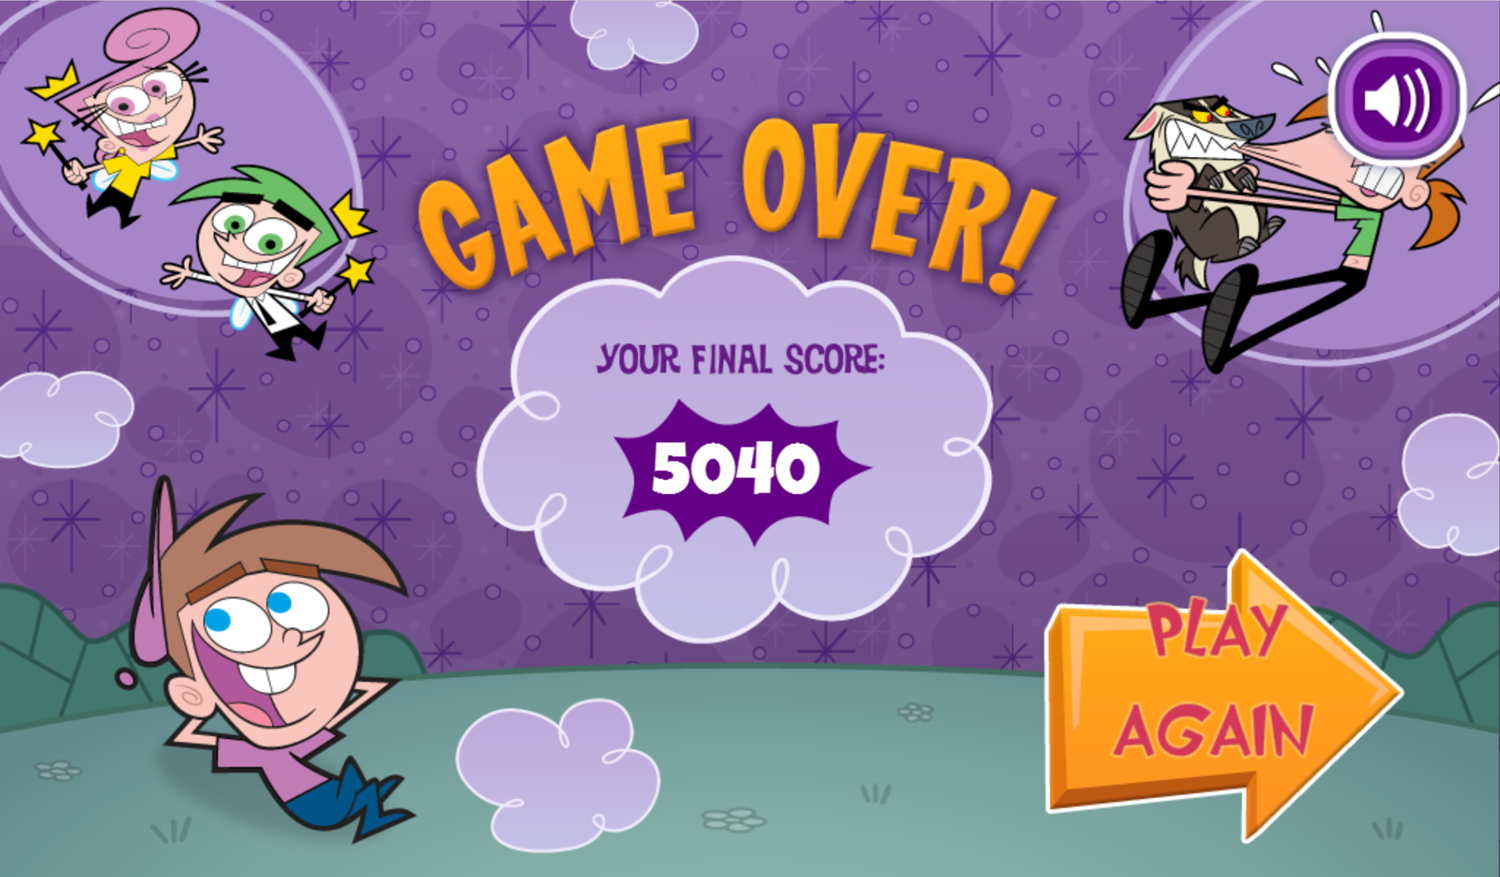 Fairly OddParents Scary GodParents Game Over Screen Screenshot.